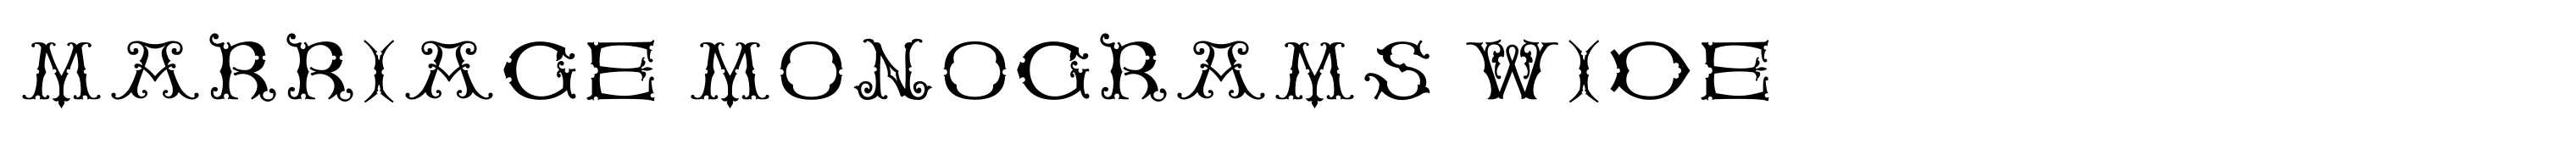 Marriage Monograms Wide